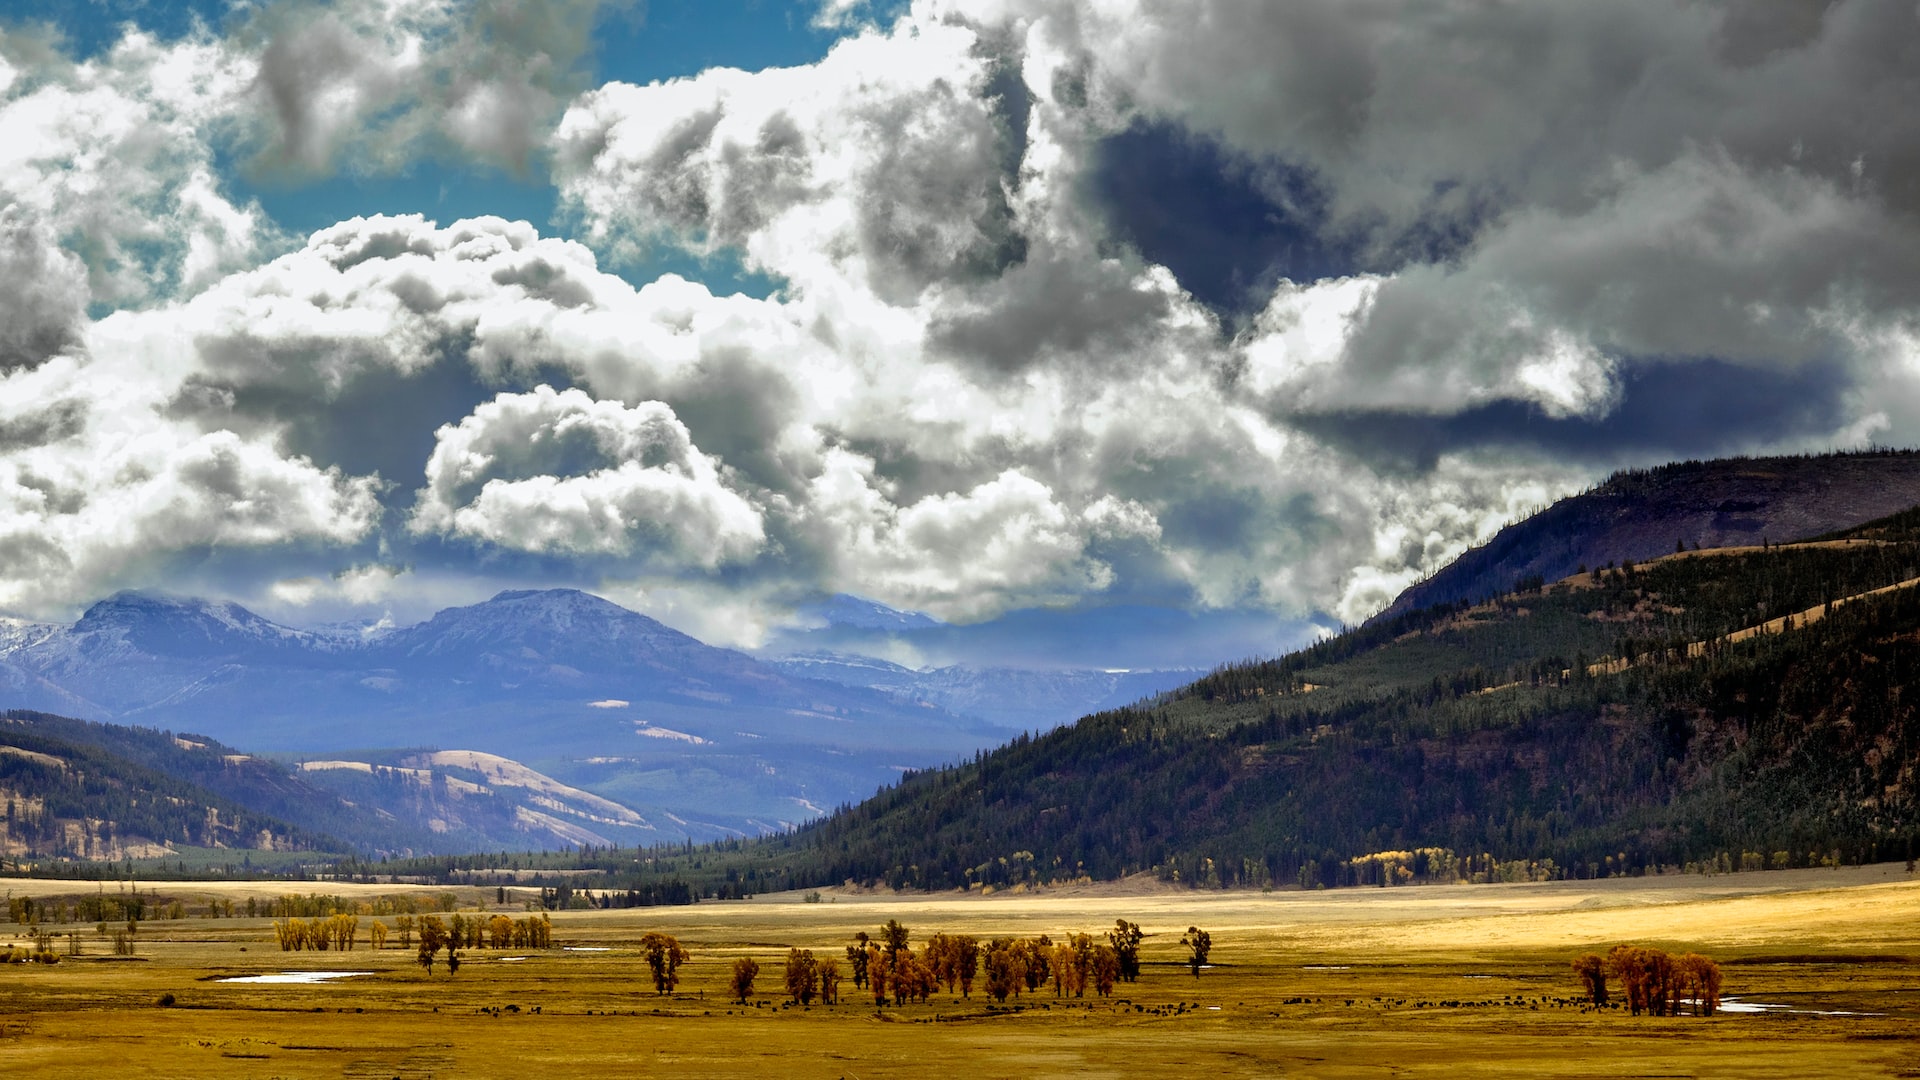 Panoramic view of the Lamar Valley and storm clouds above.